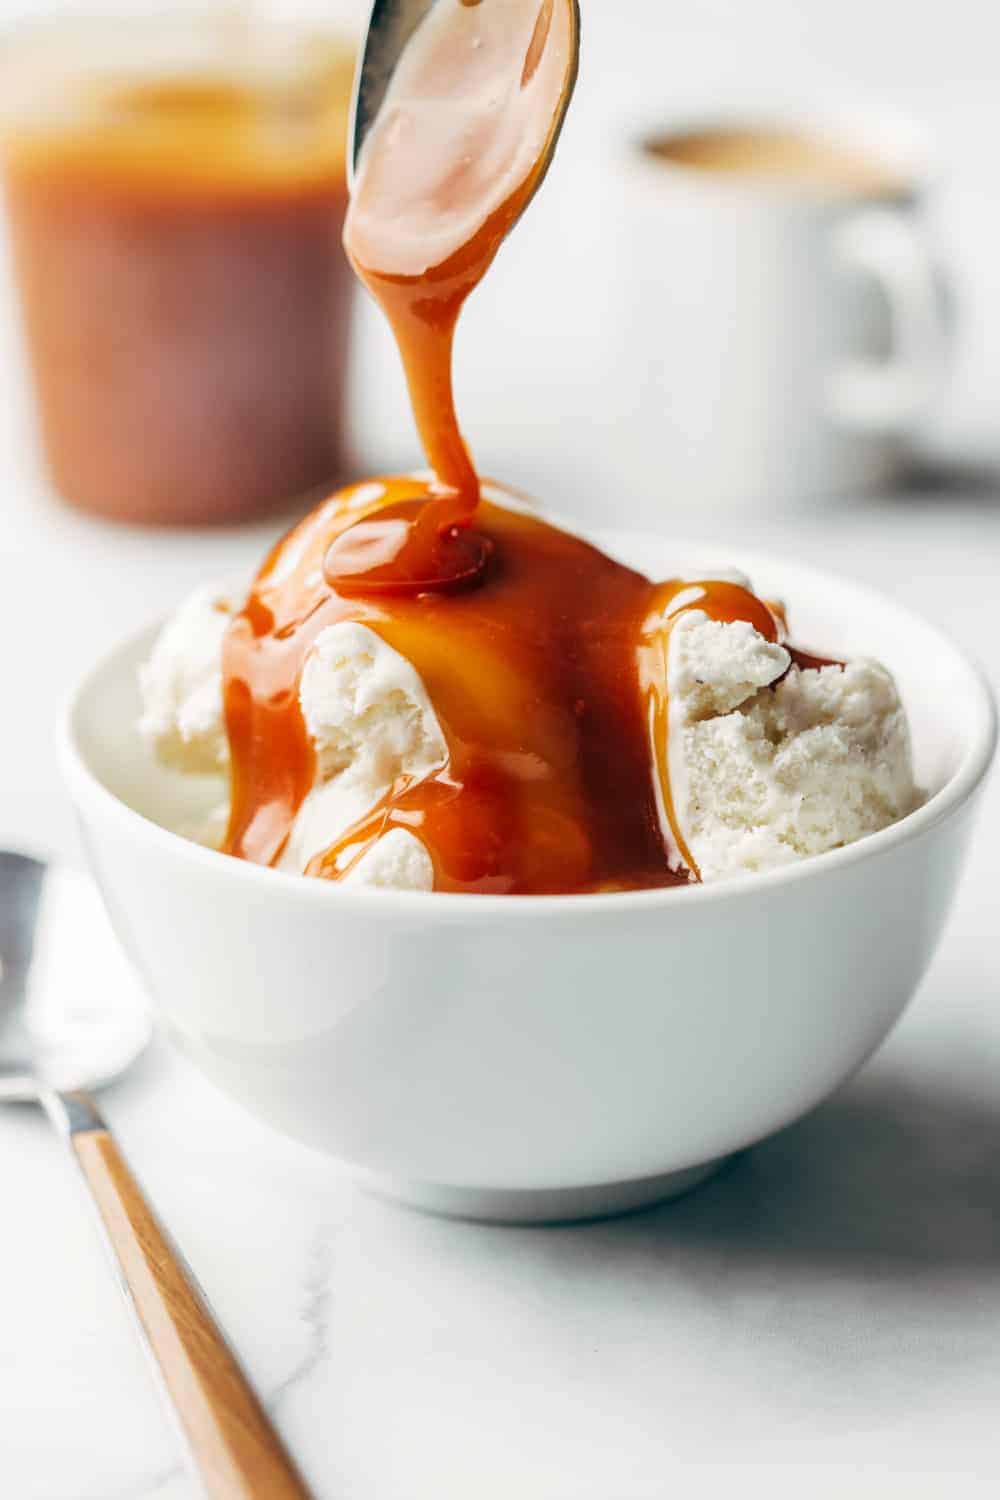 Salted caramel sauce is thick and luscious, perfect for serving over ice cream